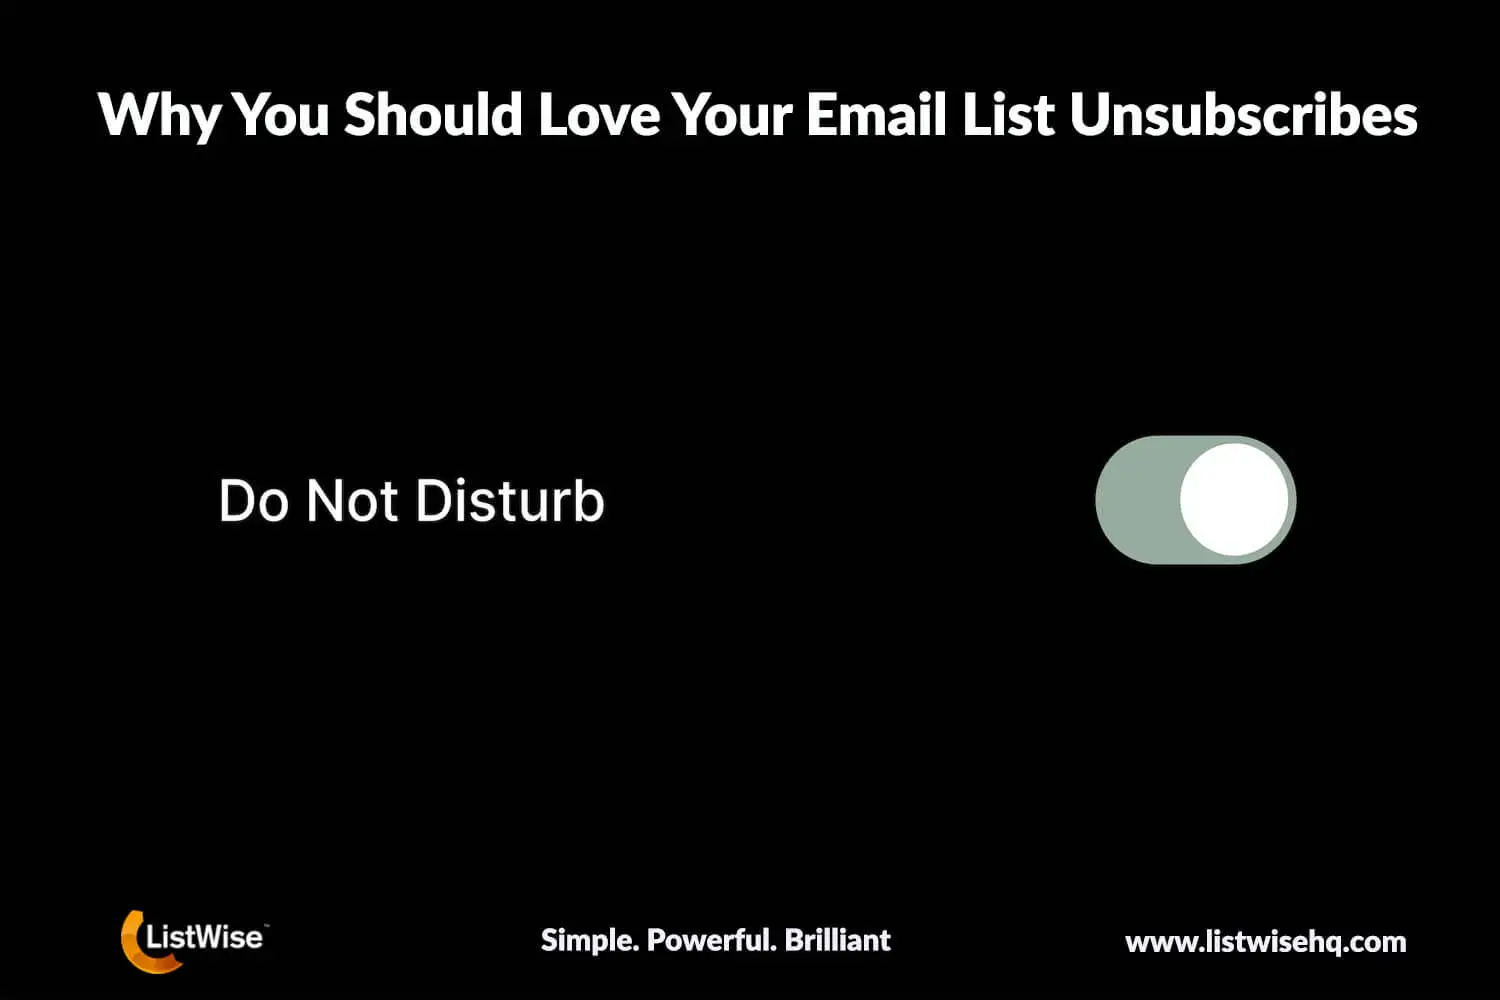 Email List Unsubscribes